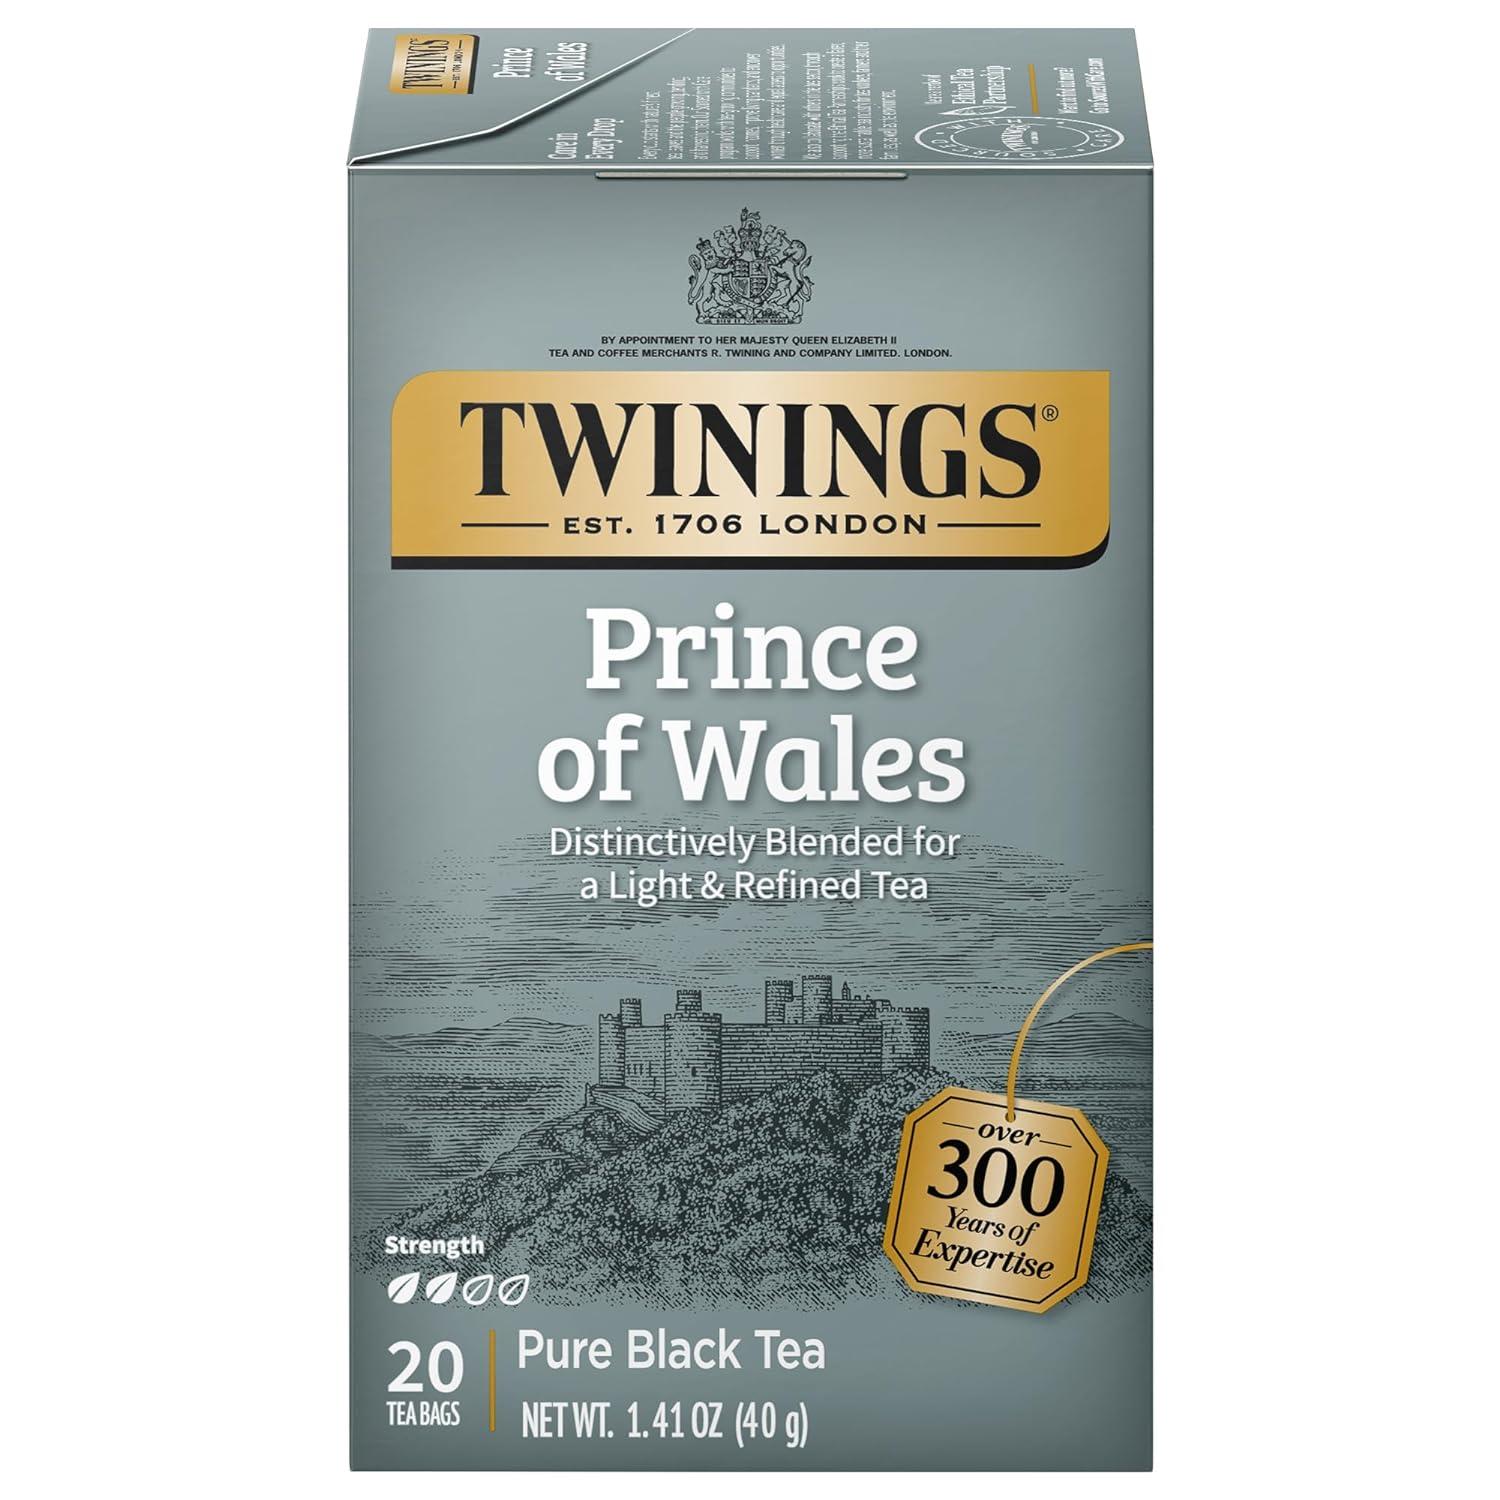 Twinings Black Tea Prince of Wales 120 Pack for $6.82